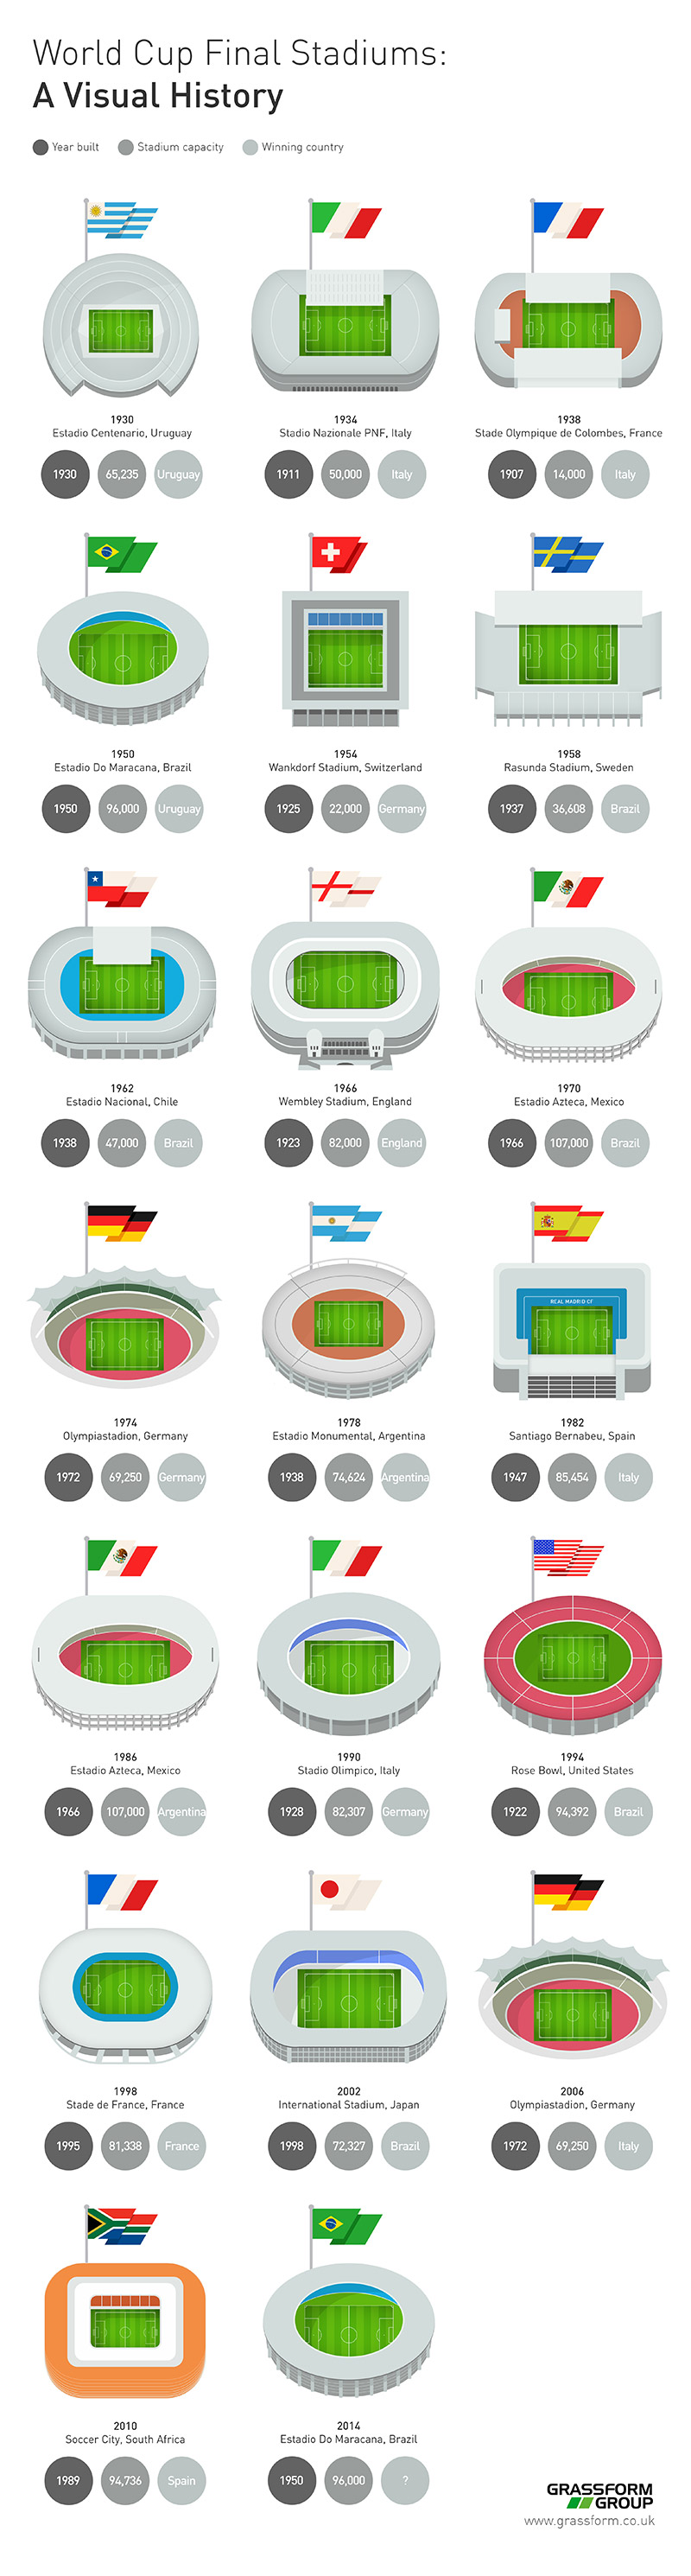 World Cup Final Stadiums (Infographic)